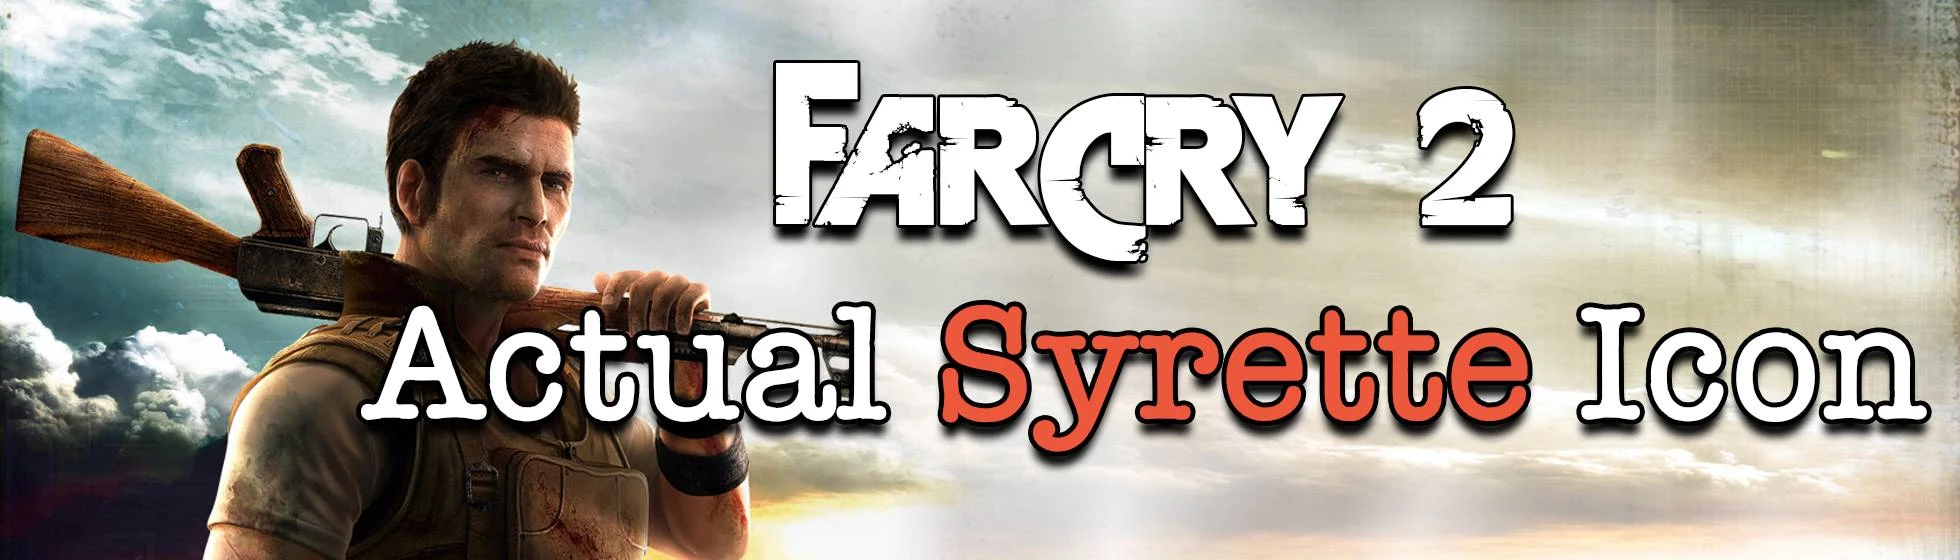 This is the MOD that starts it all. at Far Cry 2 Nexus - Mods and